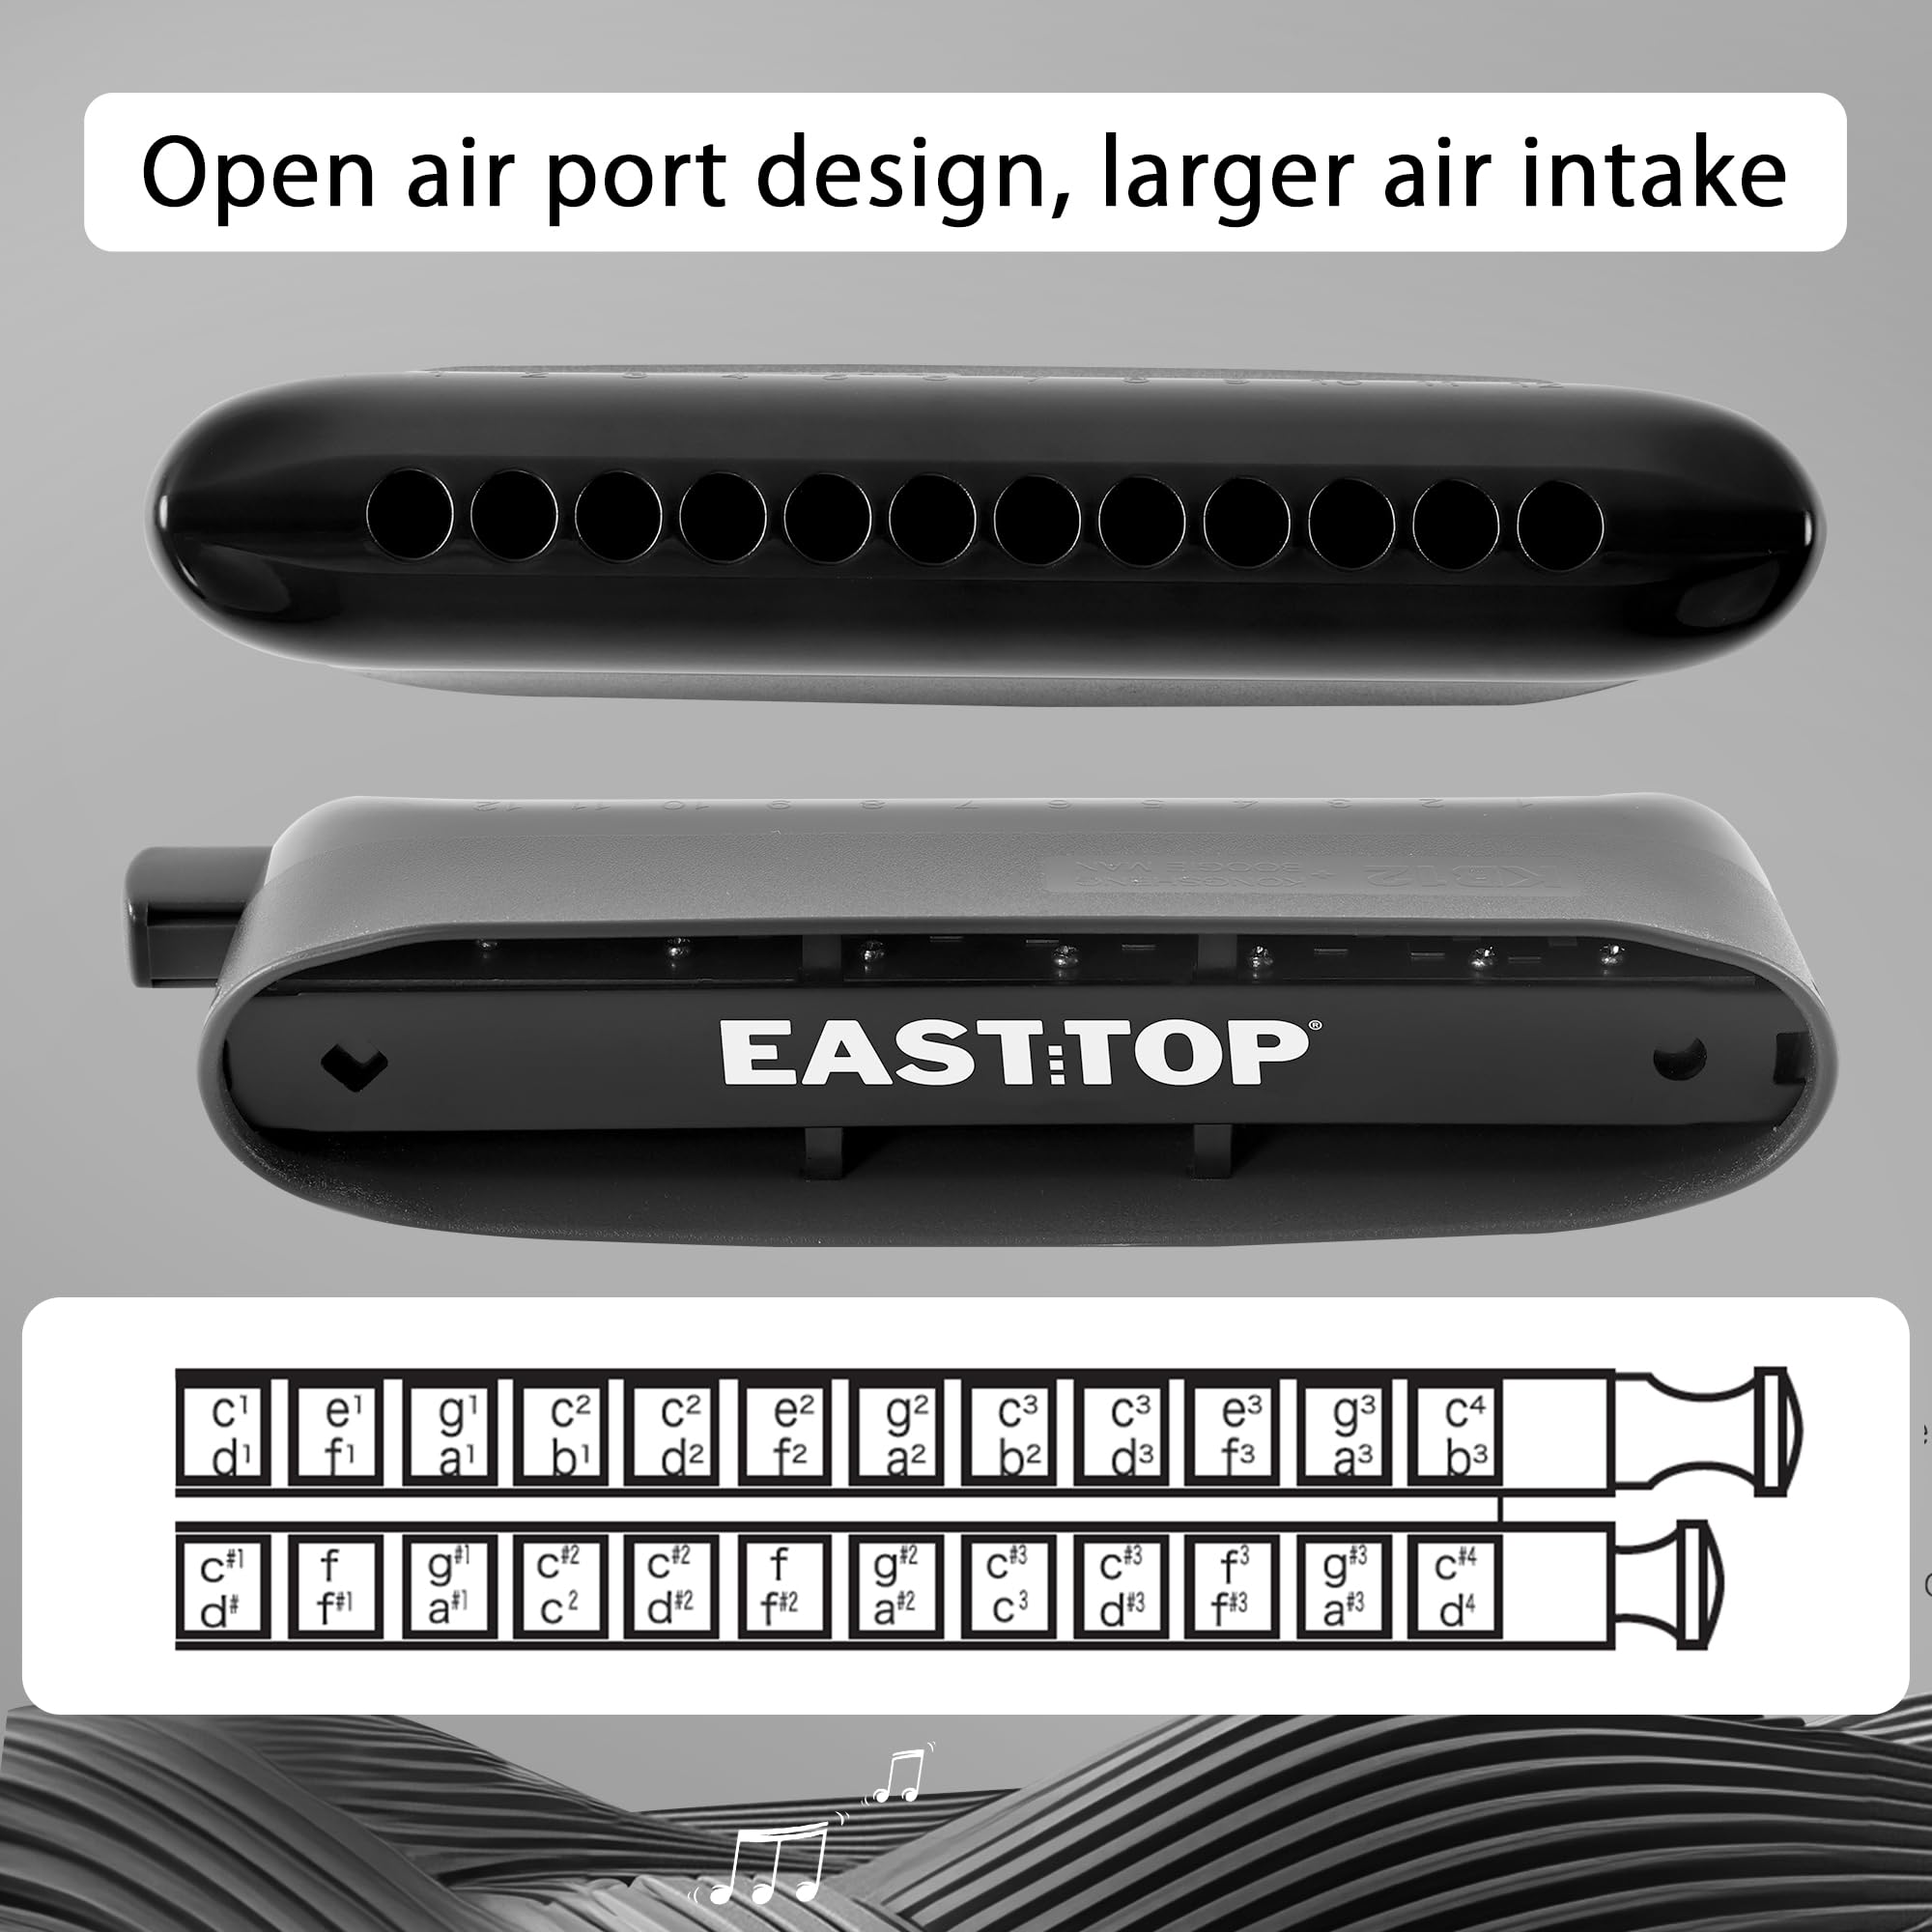 EAST TOP ET12 Chromatic Harmonica for Adults and Professionals with Unique Modern Design, Ivory/Black Cover(ET12-IVORY/BK) - Easttop harmonica